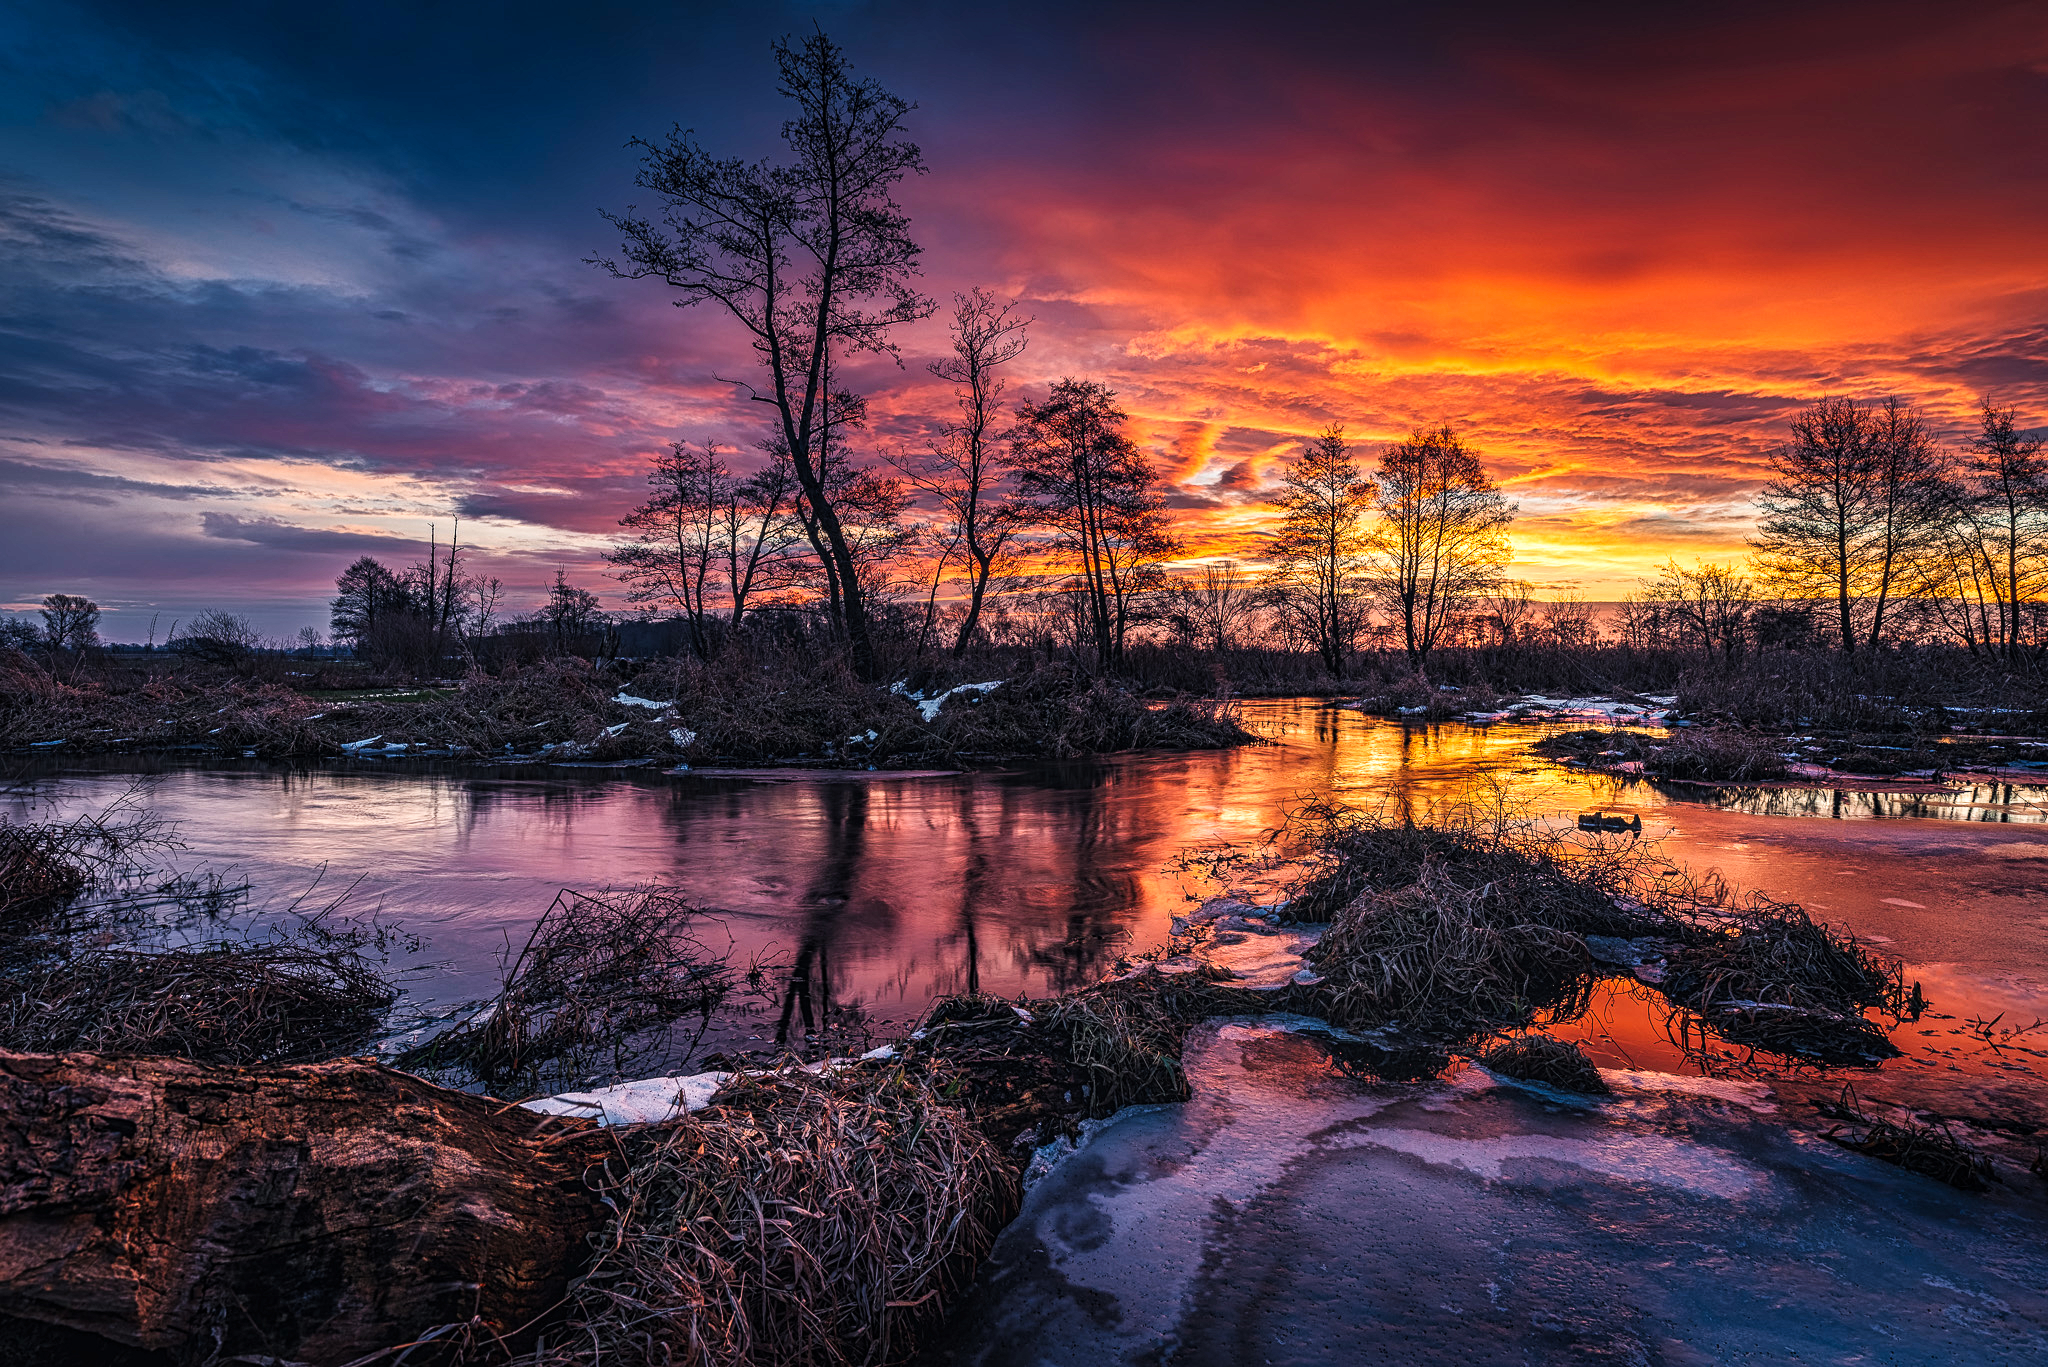 General 2048x1367 night sunset clouds sky winter cold water river lake ice landscape photography outdoors Michał Tomczak